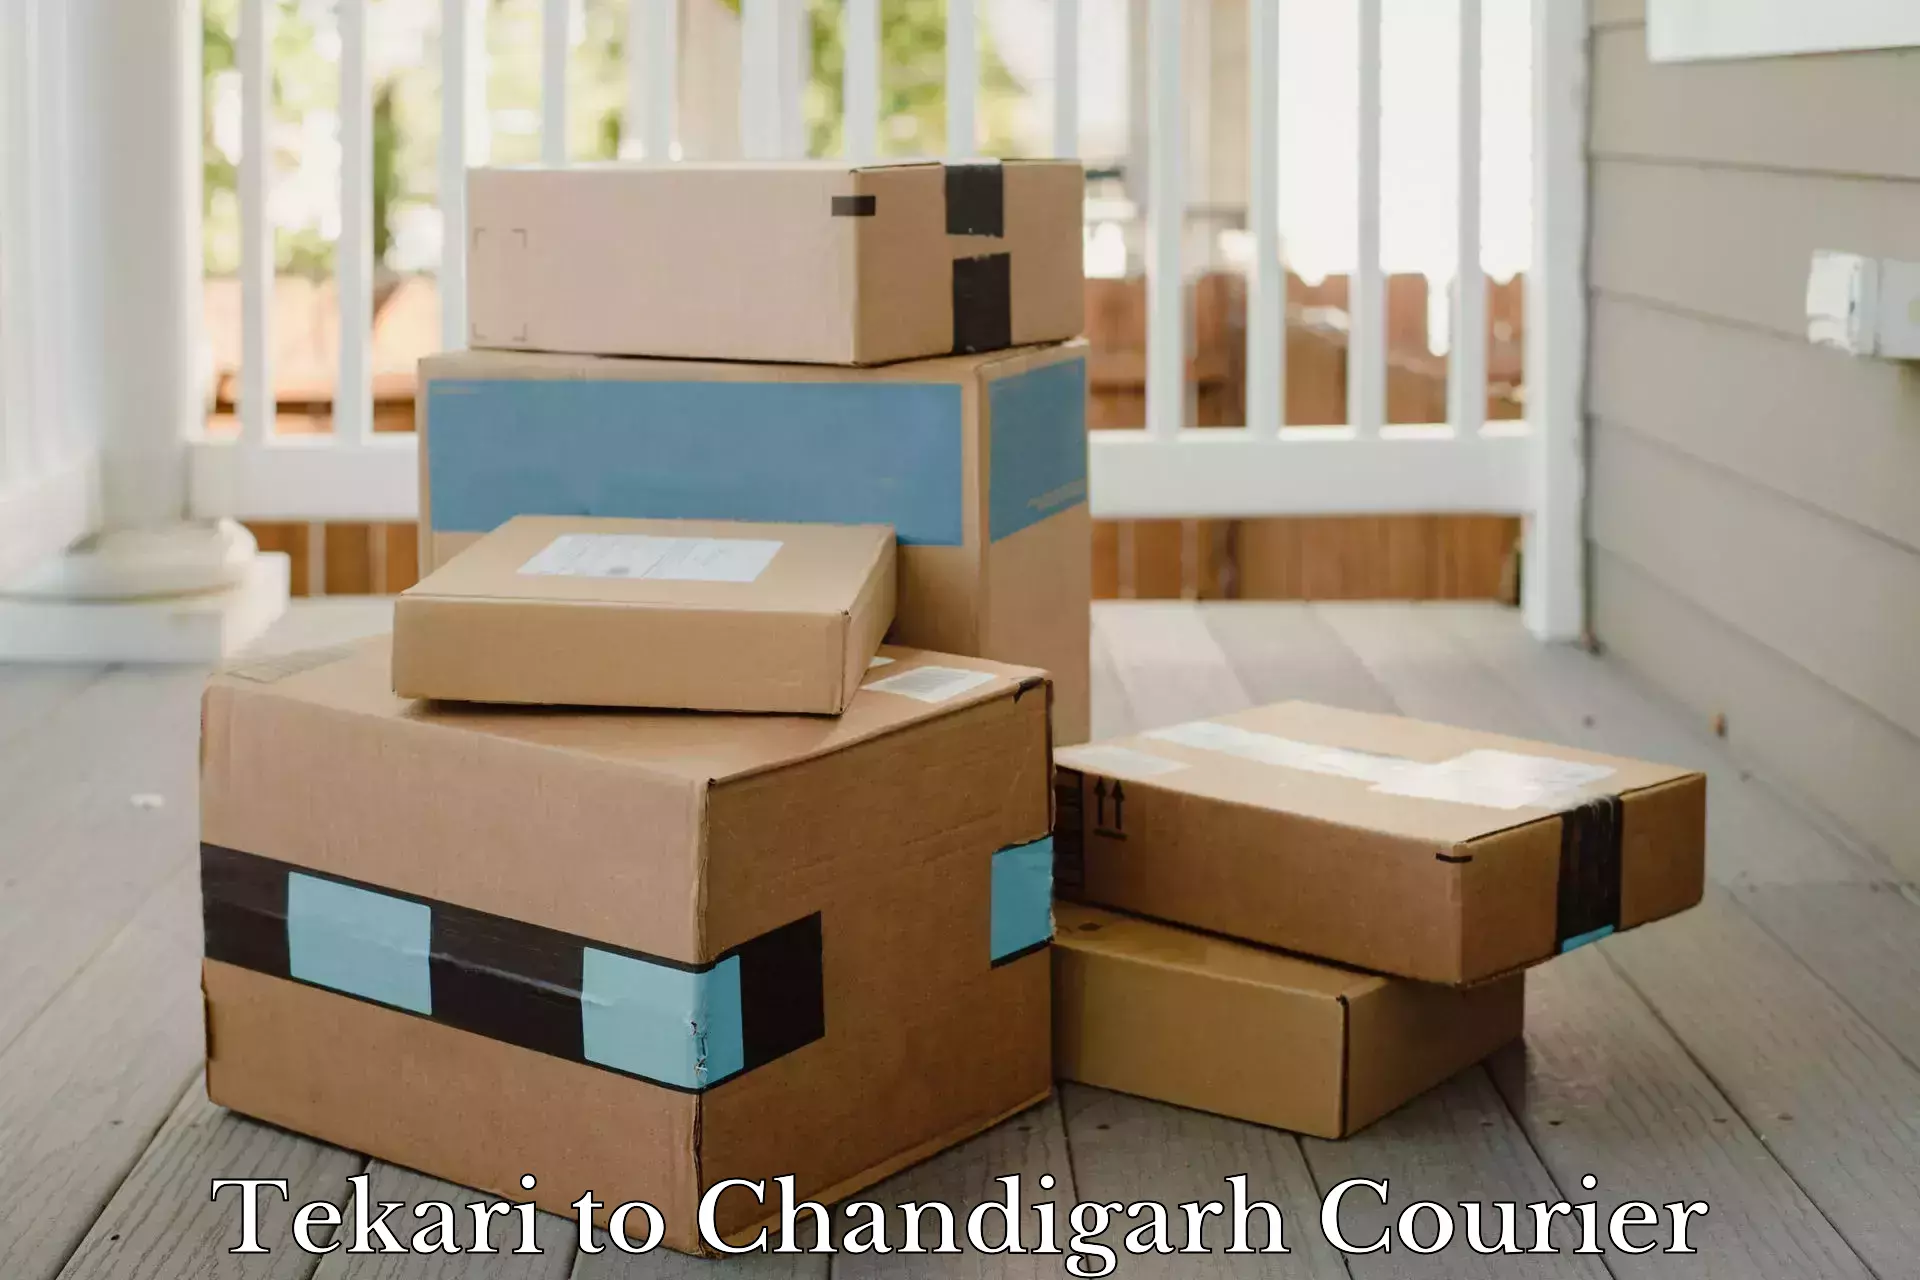 Cash on delivery service Tekari to Chandigarh